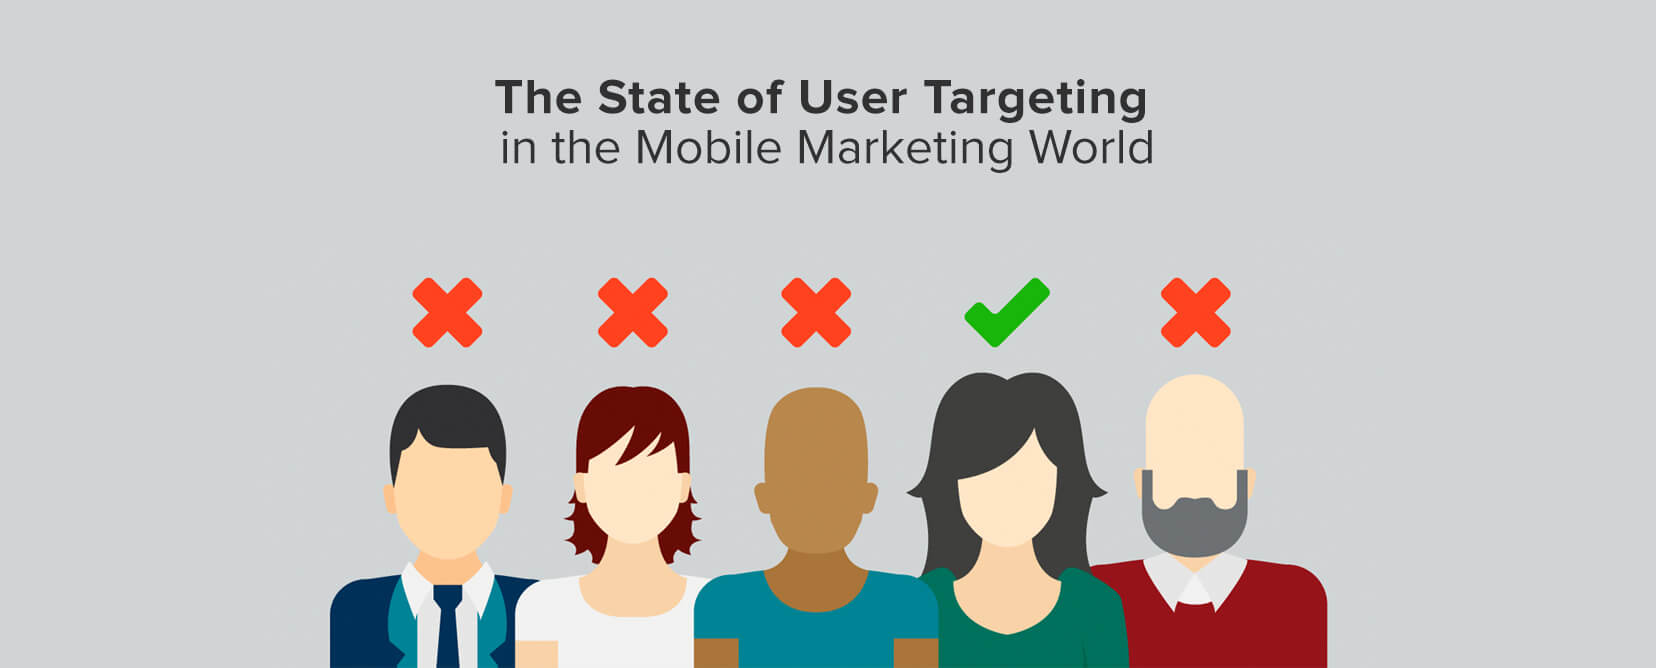 The State of User Targeting in the Mobile Marketing World